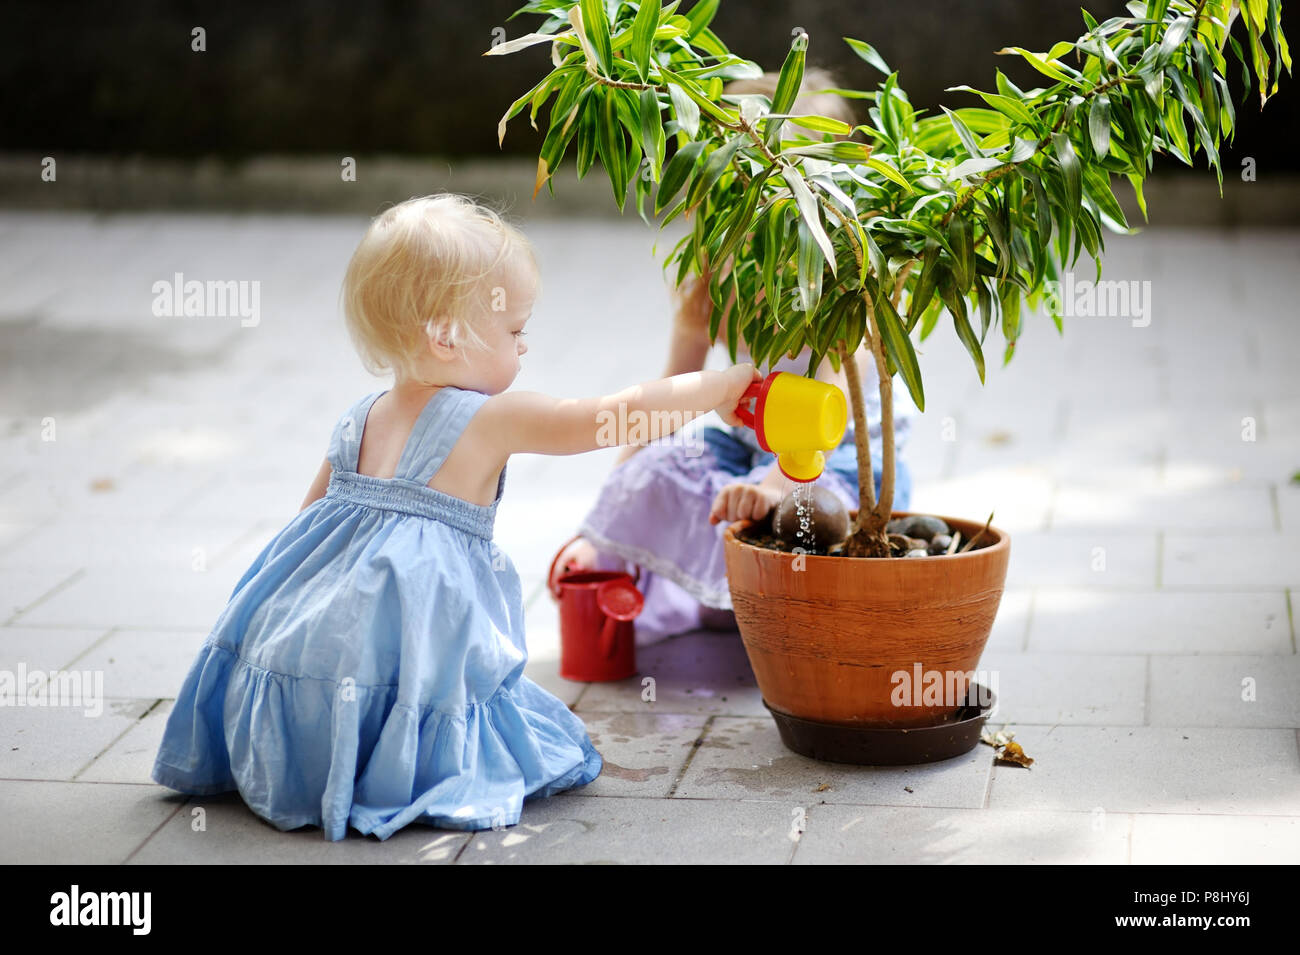 Cute little girl watering a plant in a pot Stock Photo